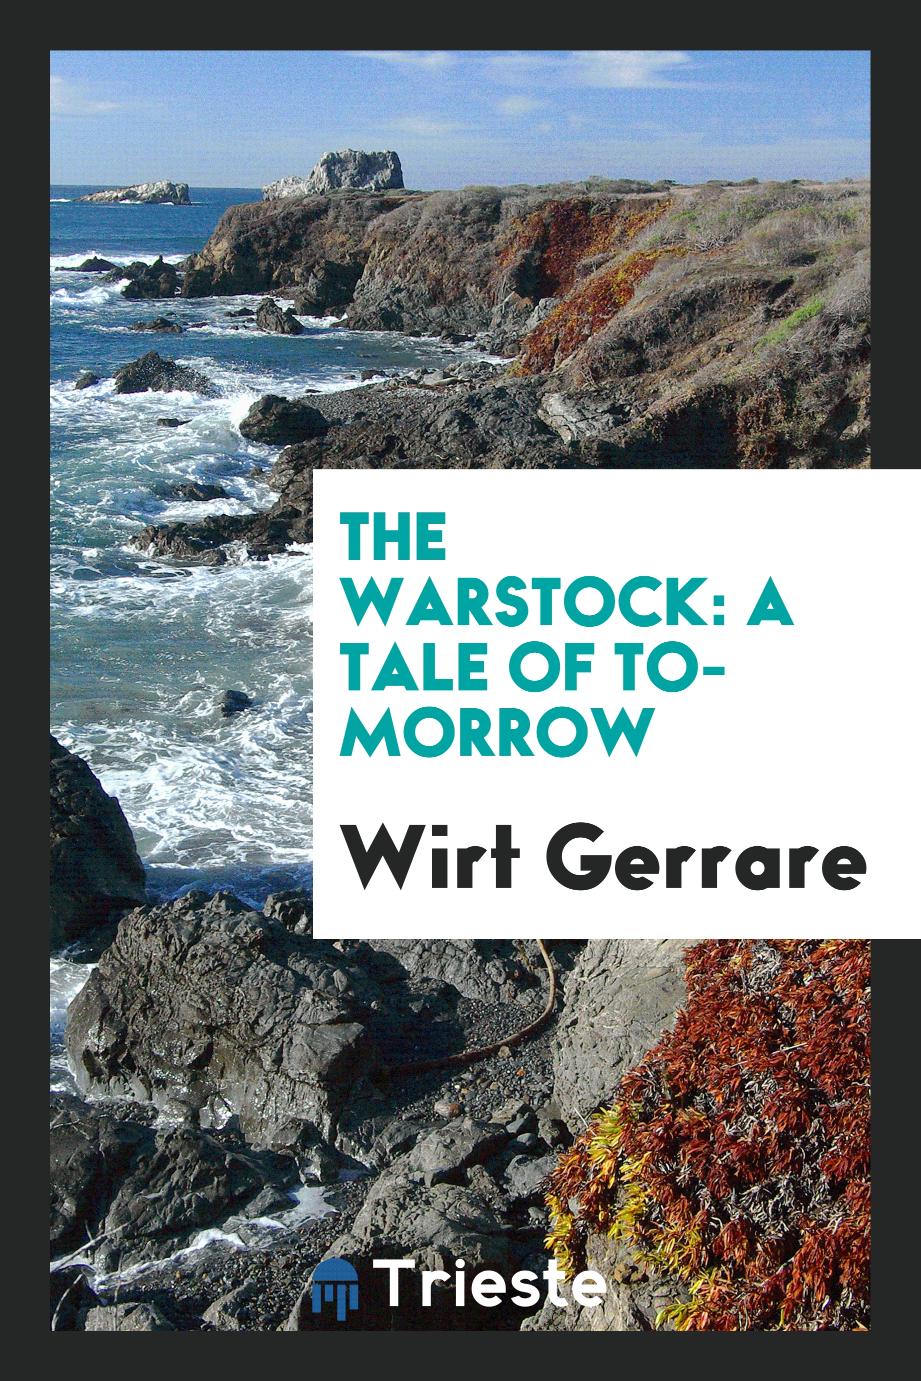 The Warstock: a tale of to-morrow